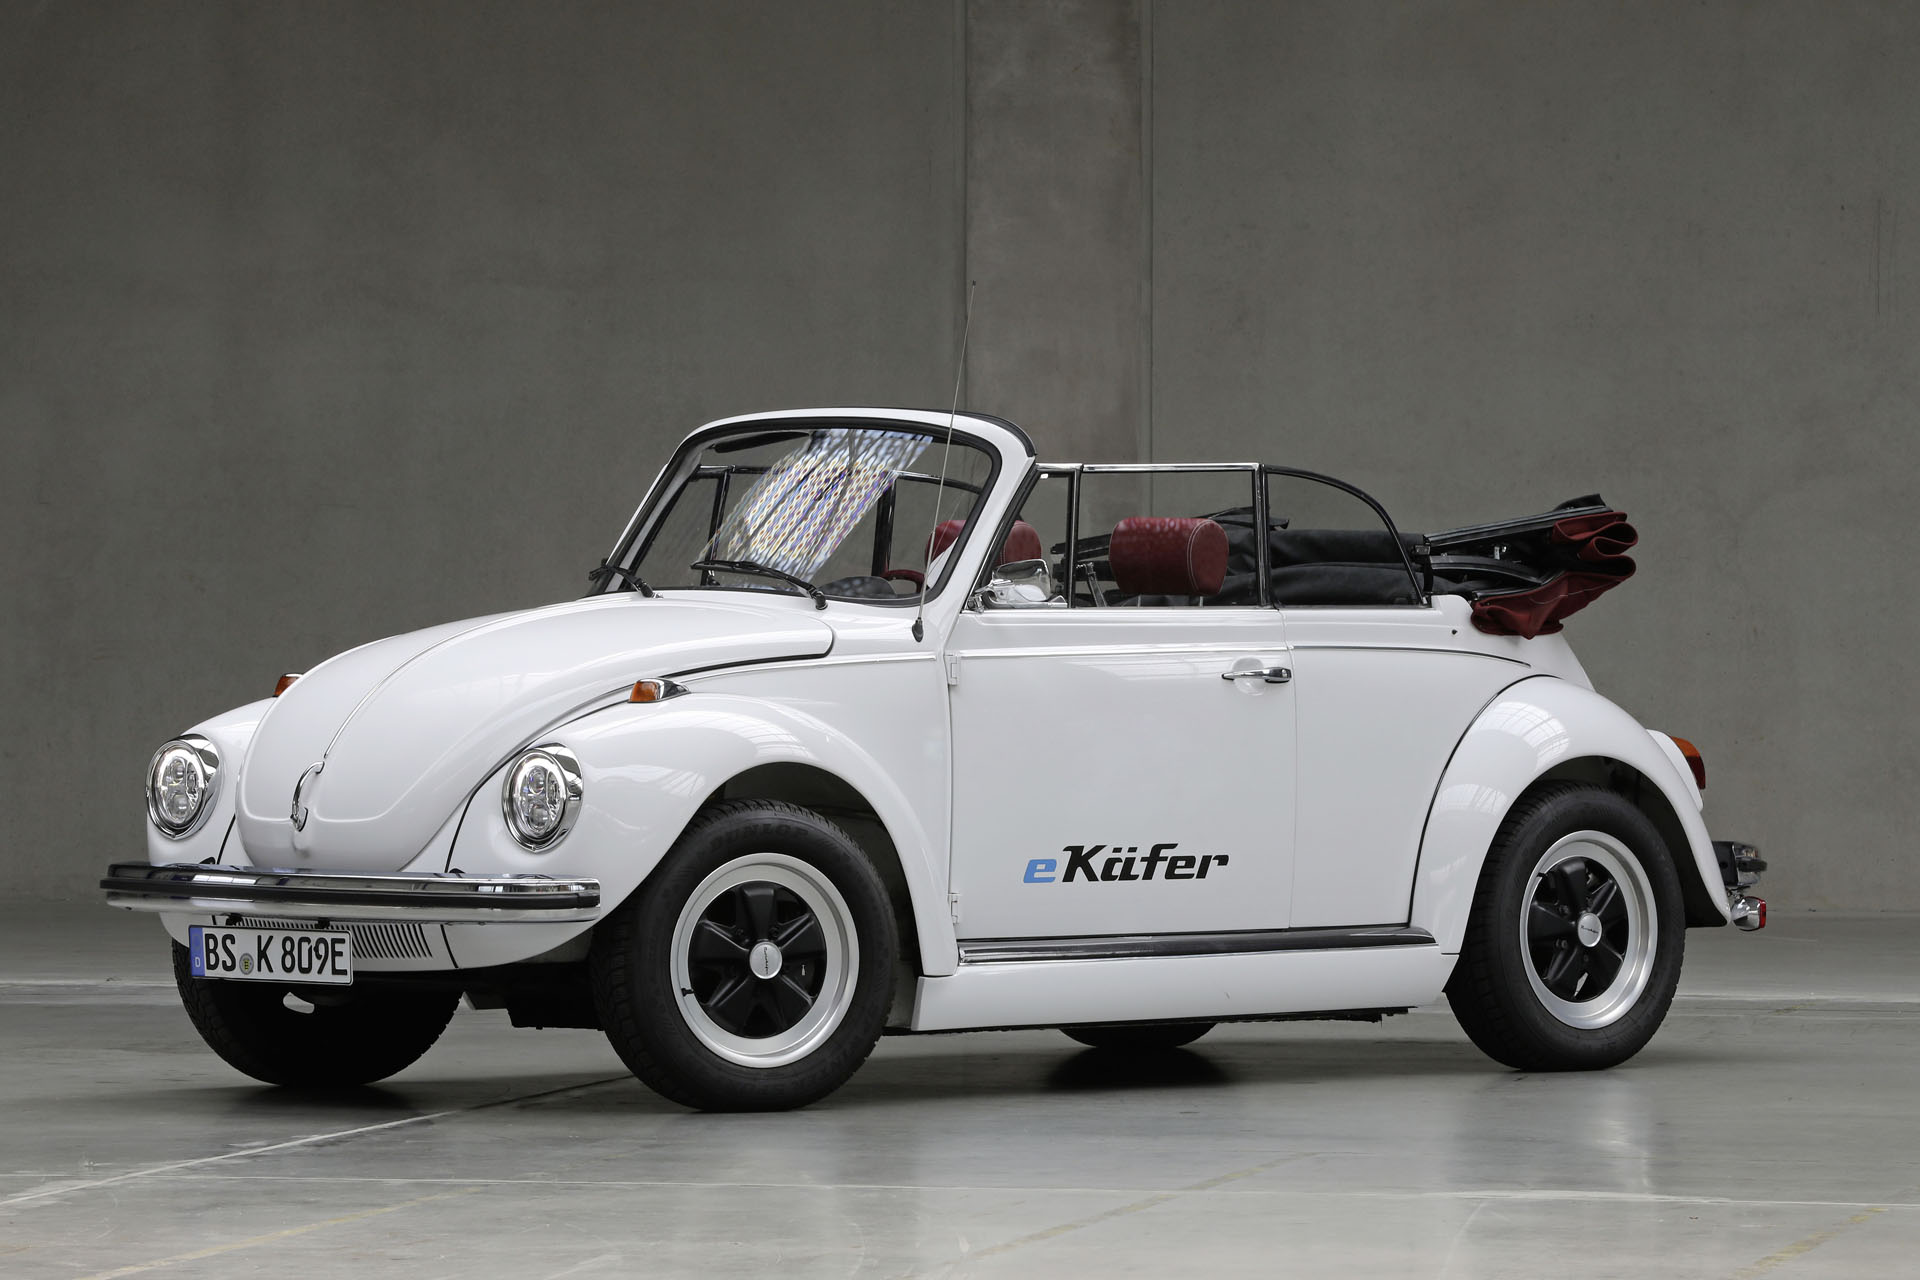 VW Bug charges into the future with electric drivetrain